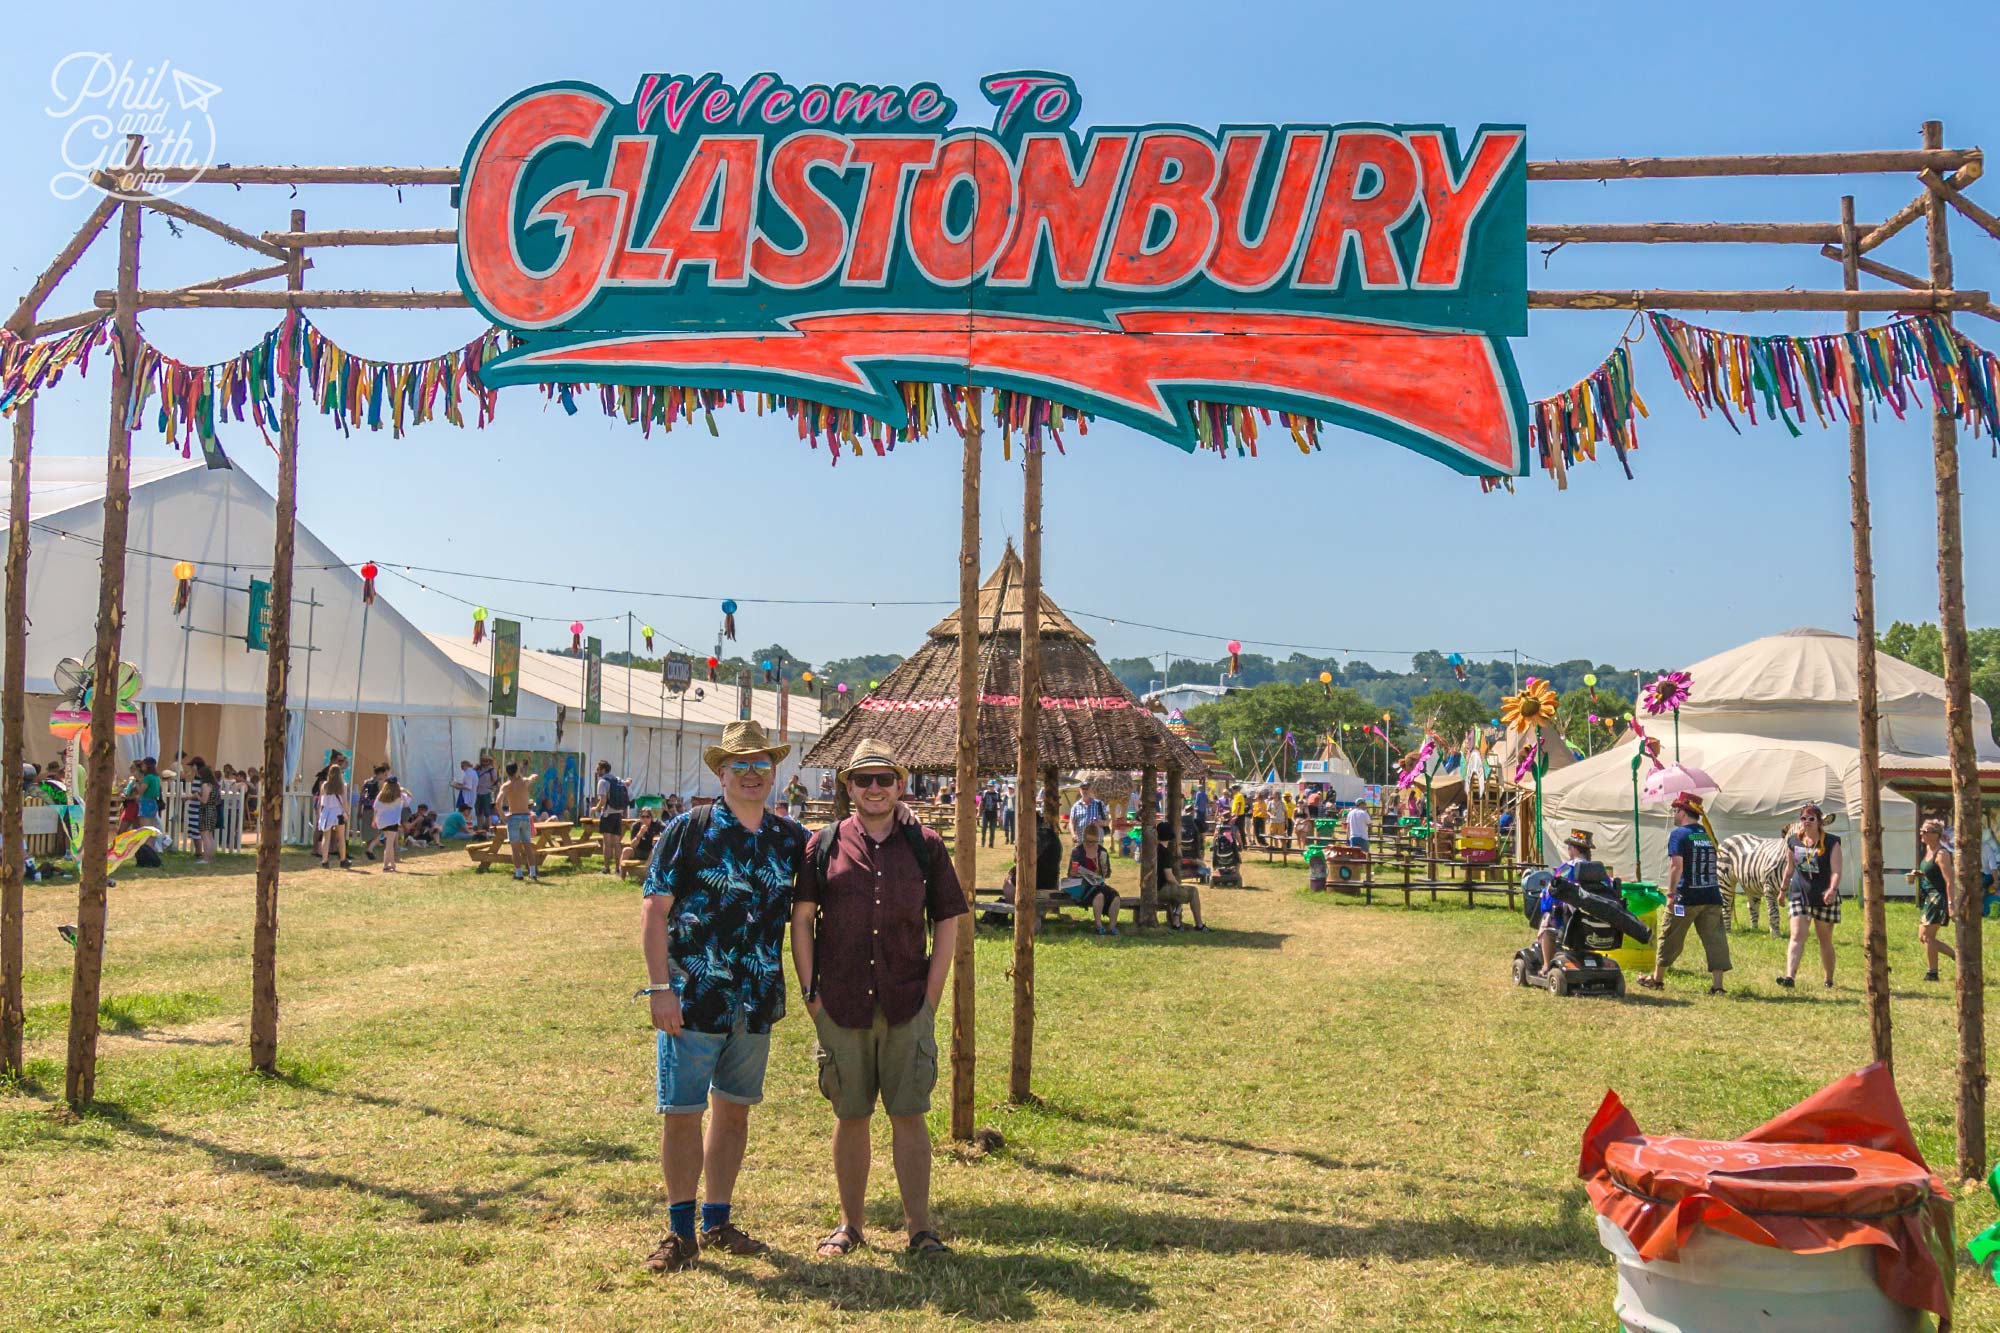 Welcome to Glastonbury with Phil and Garth